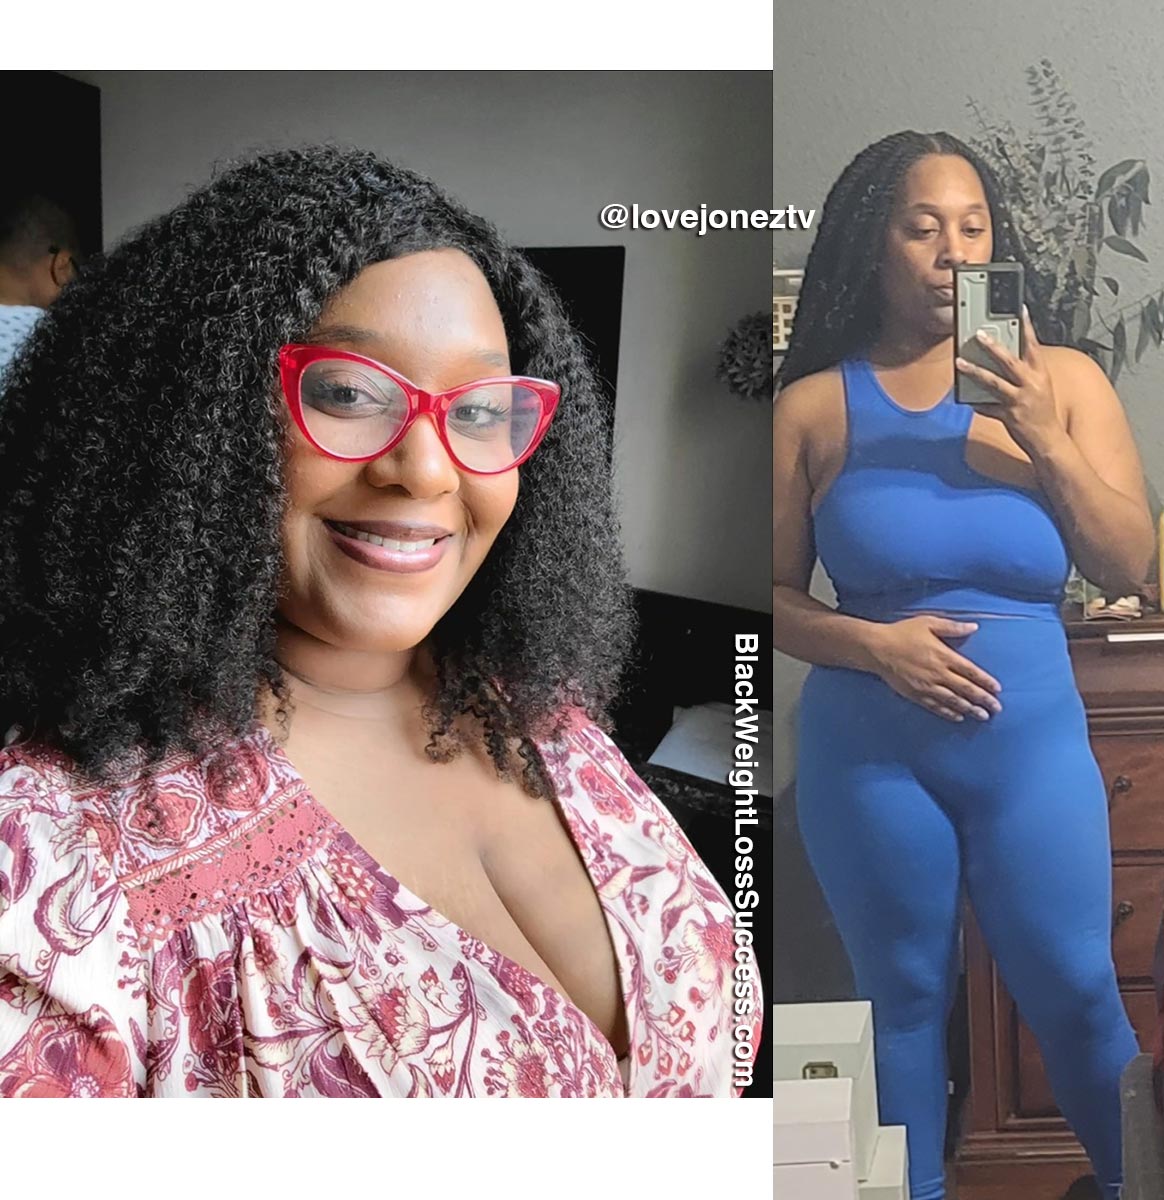 Mynetria before and after weight loss